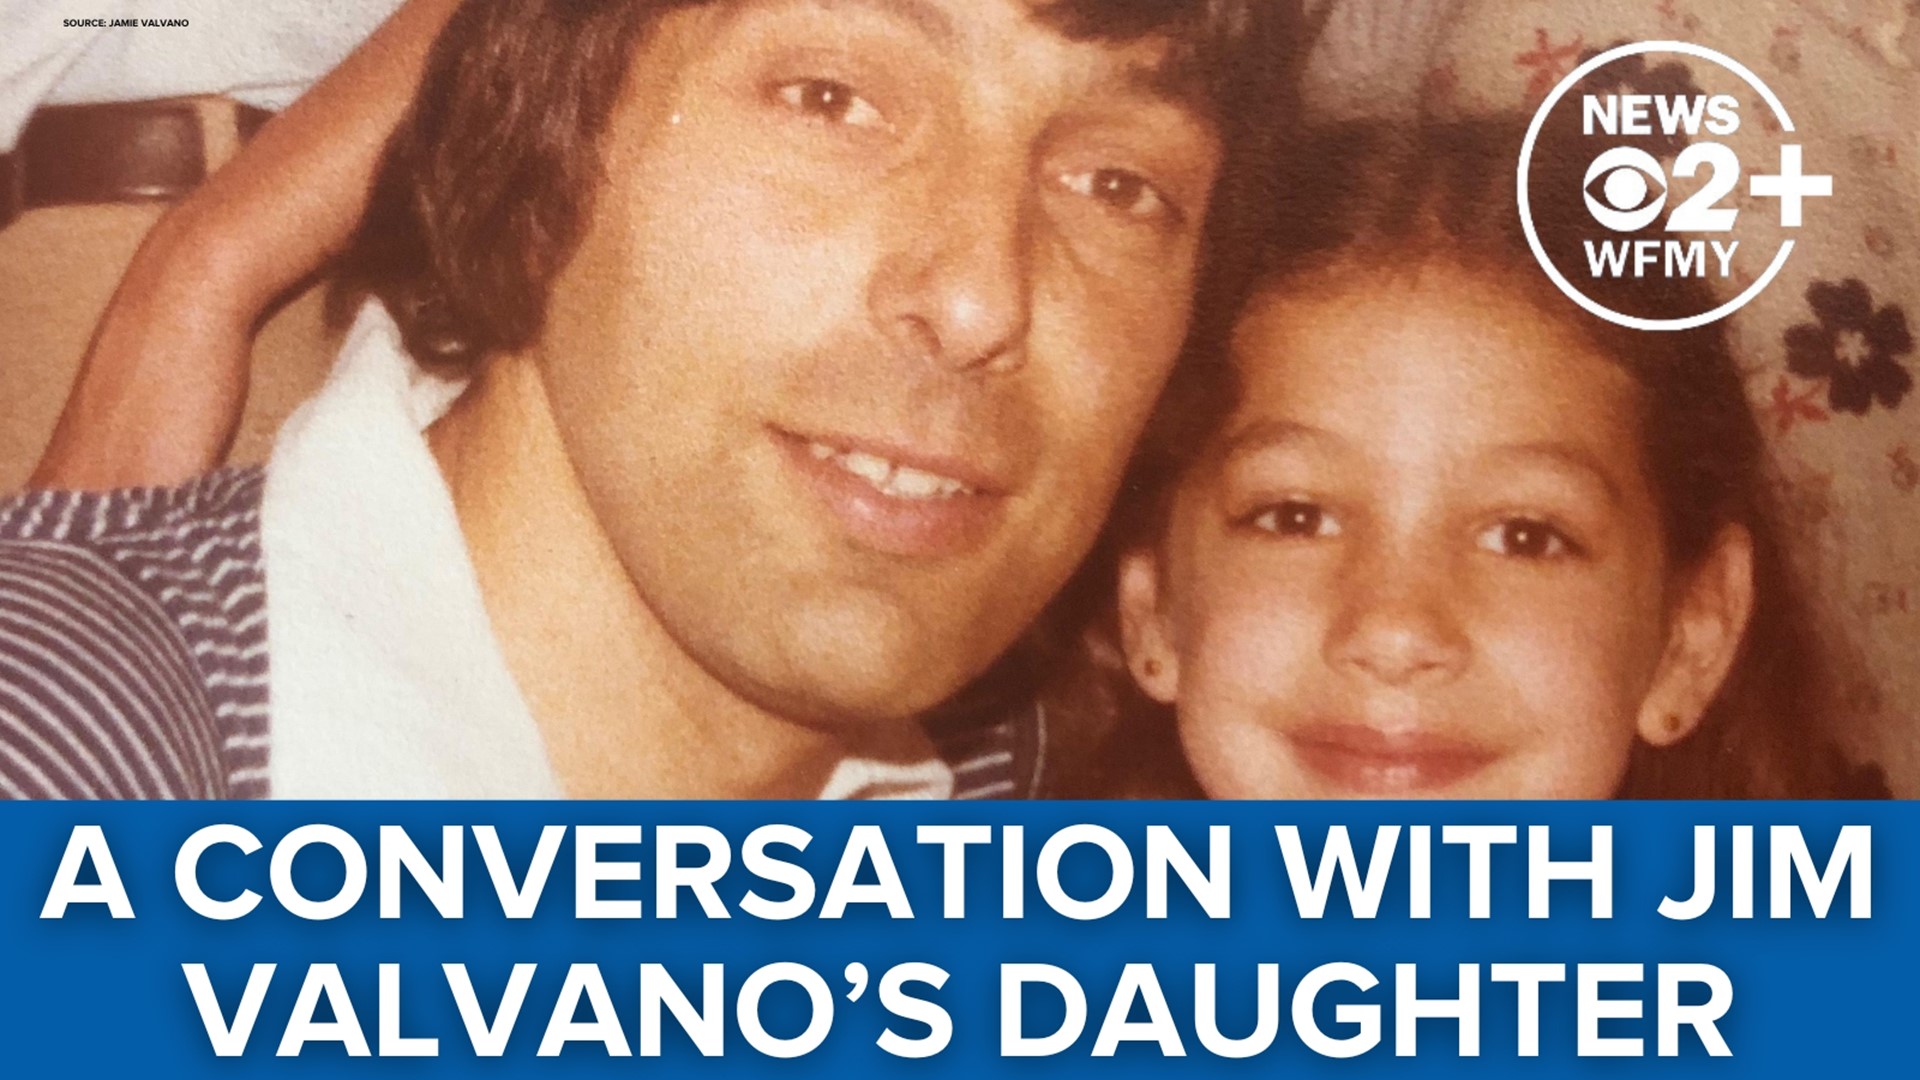 Legendary NC State coach Jimmy V’s daughter Jamie Valvano shares her dad’s legacy and what her father would think of the Wolfpack’s miracle run to the Final Four.